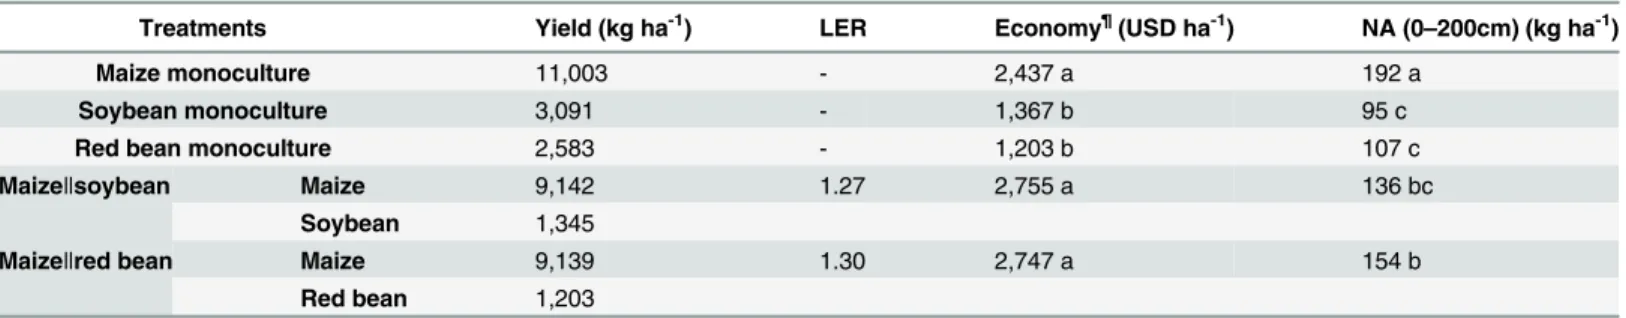 Table 3. Crop yield, economic benefit, soil nitrate-N accumulation at 0 – 200 cm soil depth (NA) and land equivalent ratio (LER) in different crop sys- sys-tems at harvest in the summer of 2010 (Experiment 1).